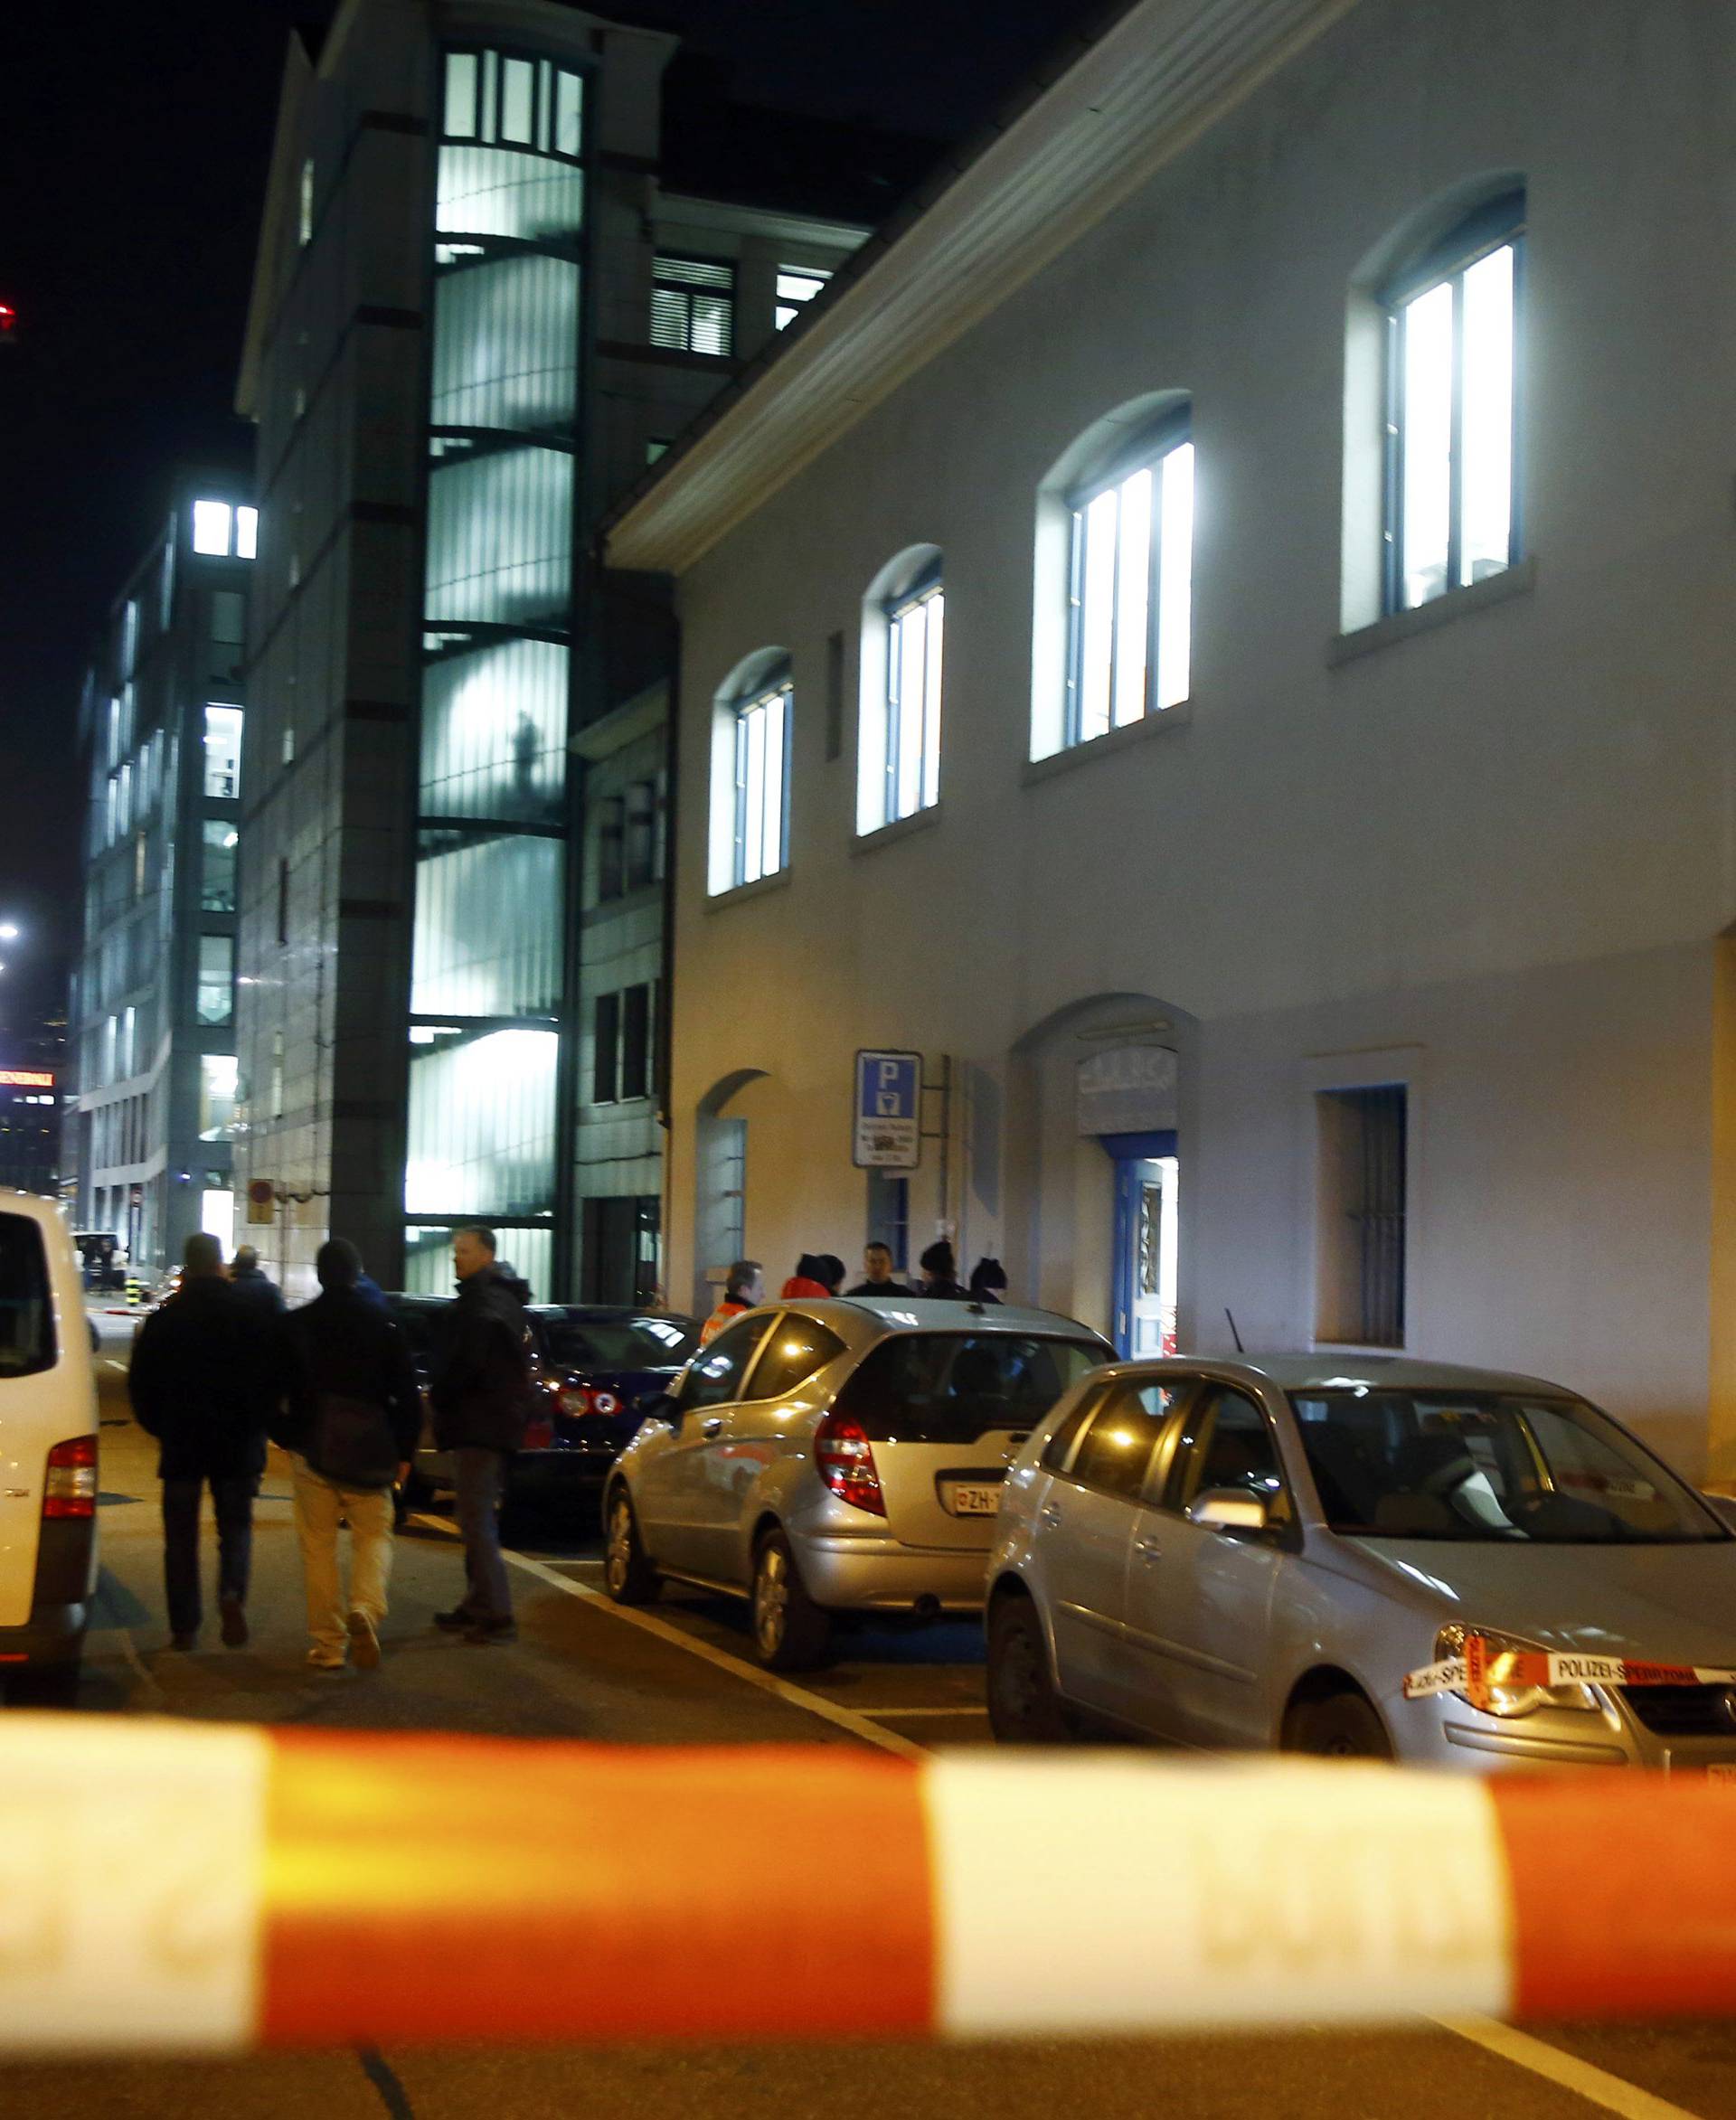 Police stand outside an Islamic center in central Zurich